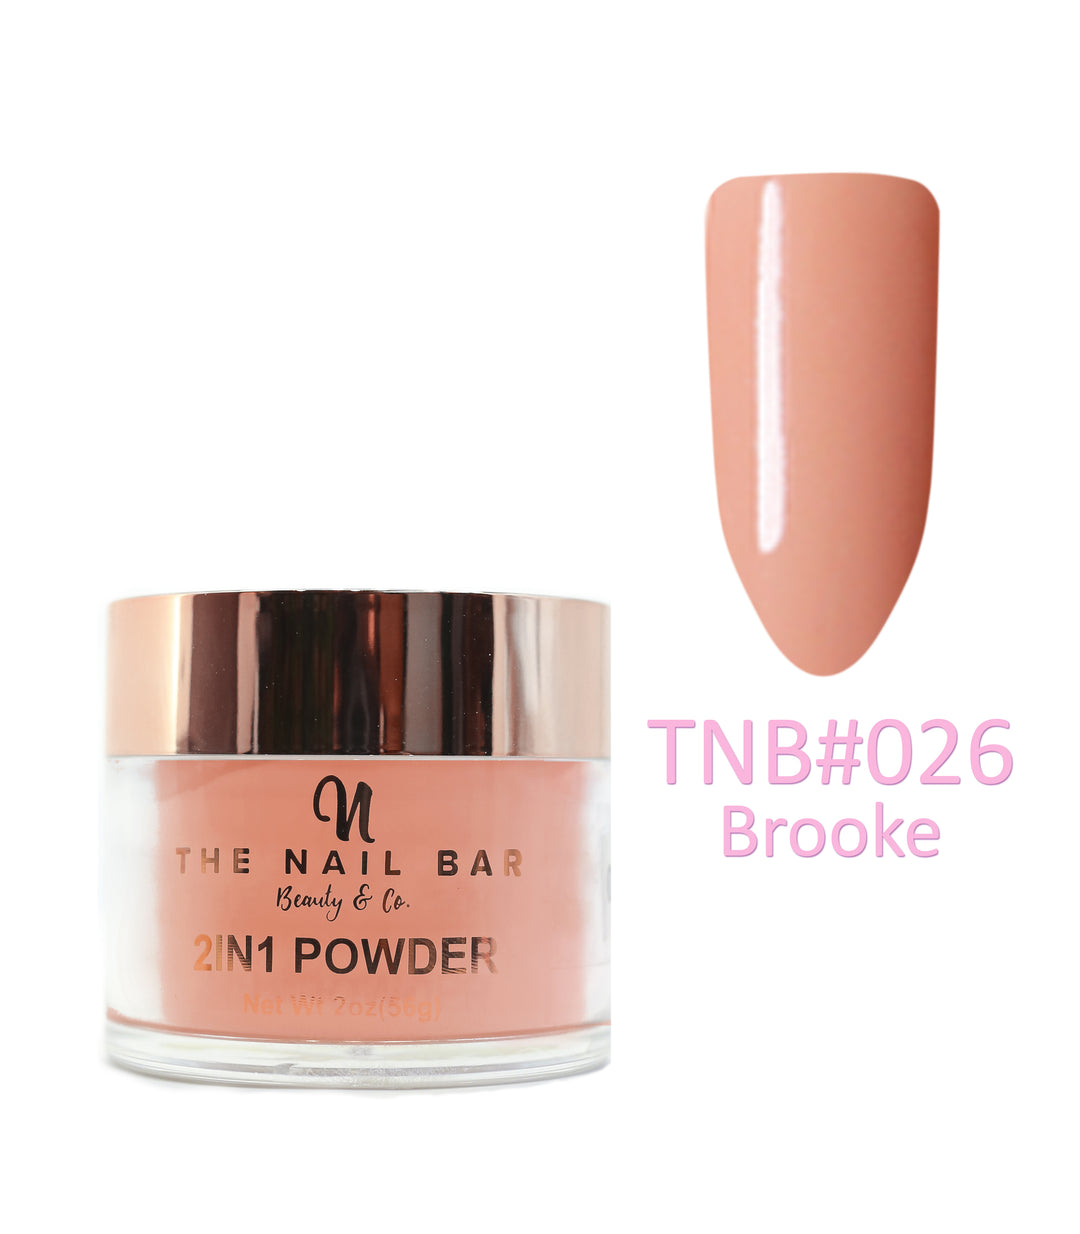 2-In-1 Dipping/Acrylic colour powder (2oz) -Brooke - The Nail Bar Beauty & Co.